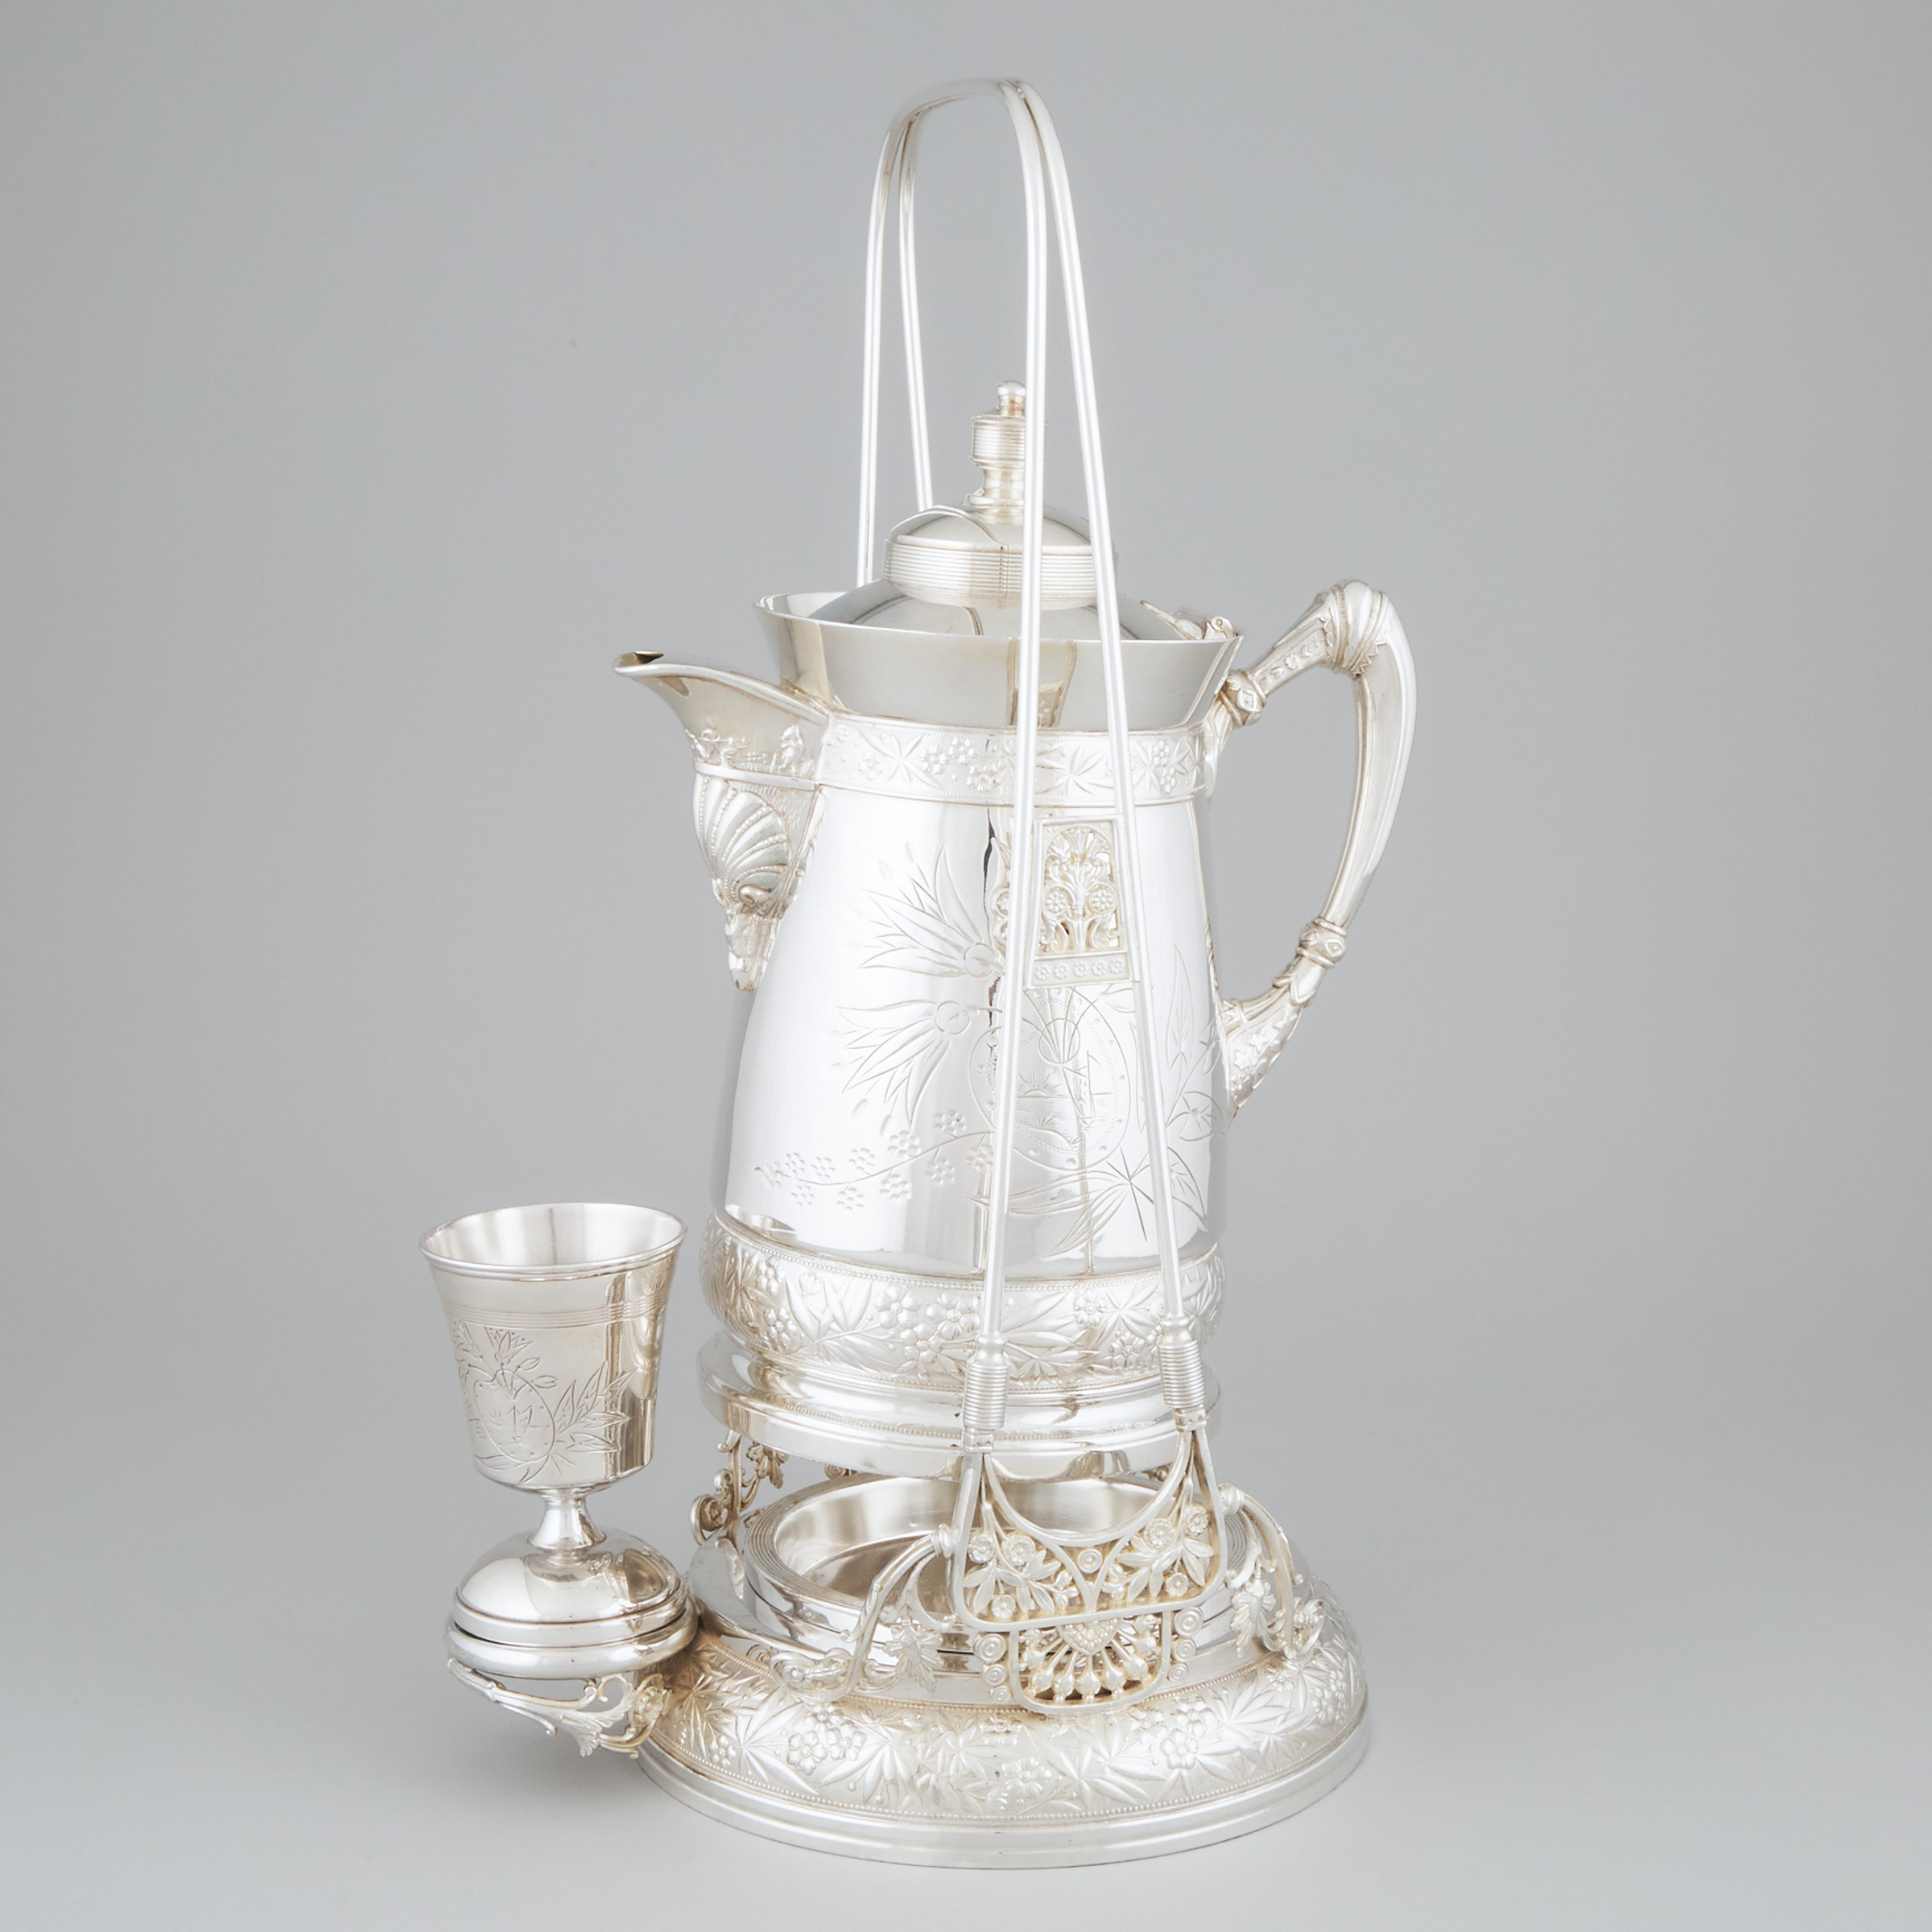 American Silver Plated Iced Water or Lemonade Jug on Stand with Goblet, Simpson Hall Miller & Co., c.1880